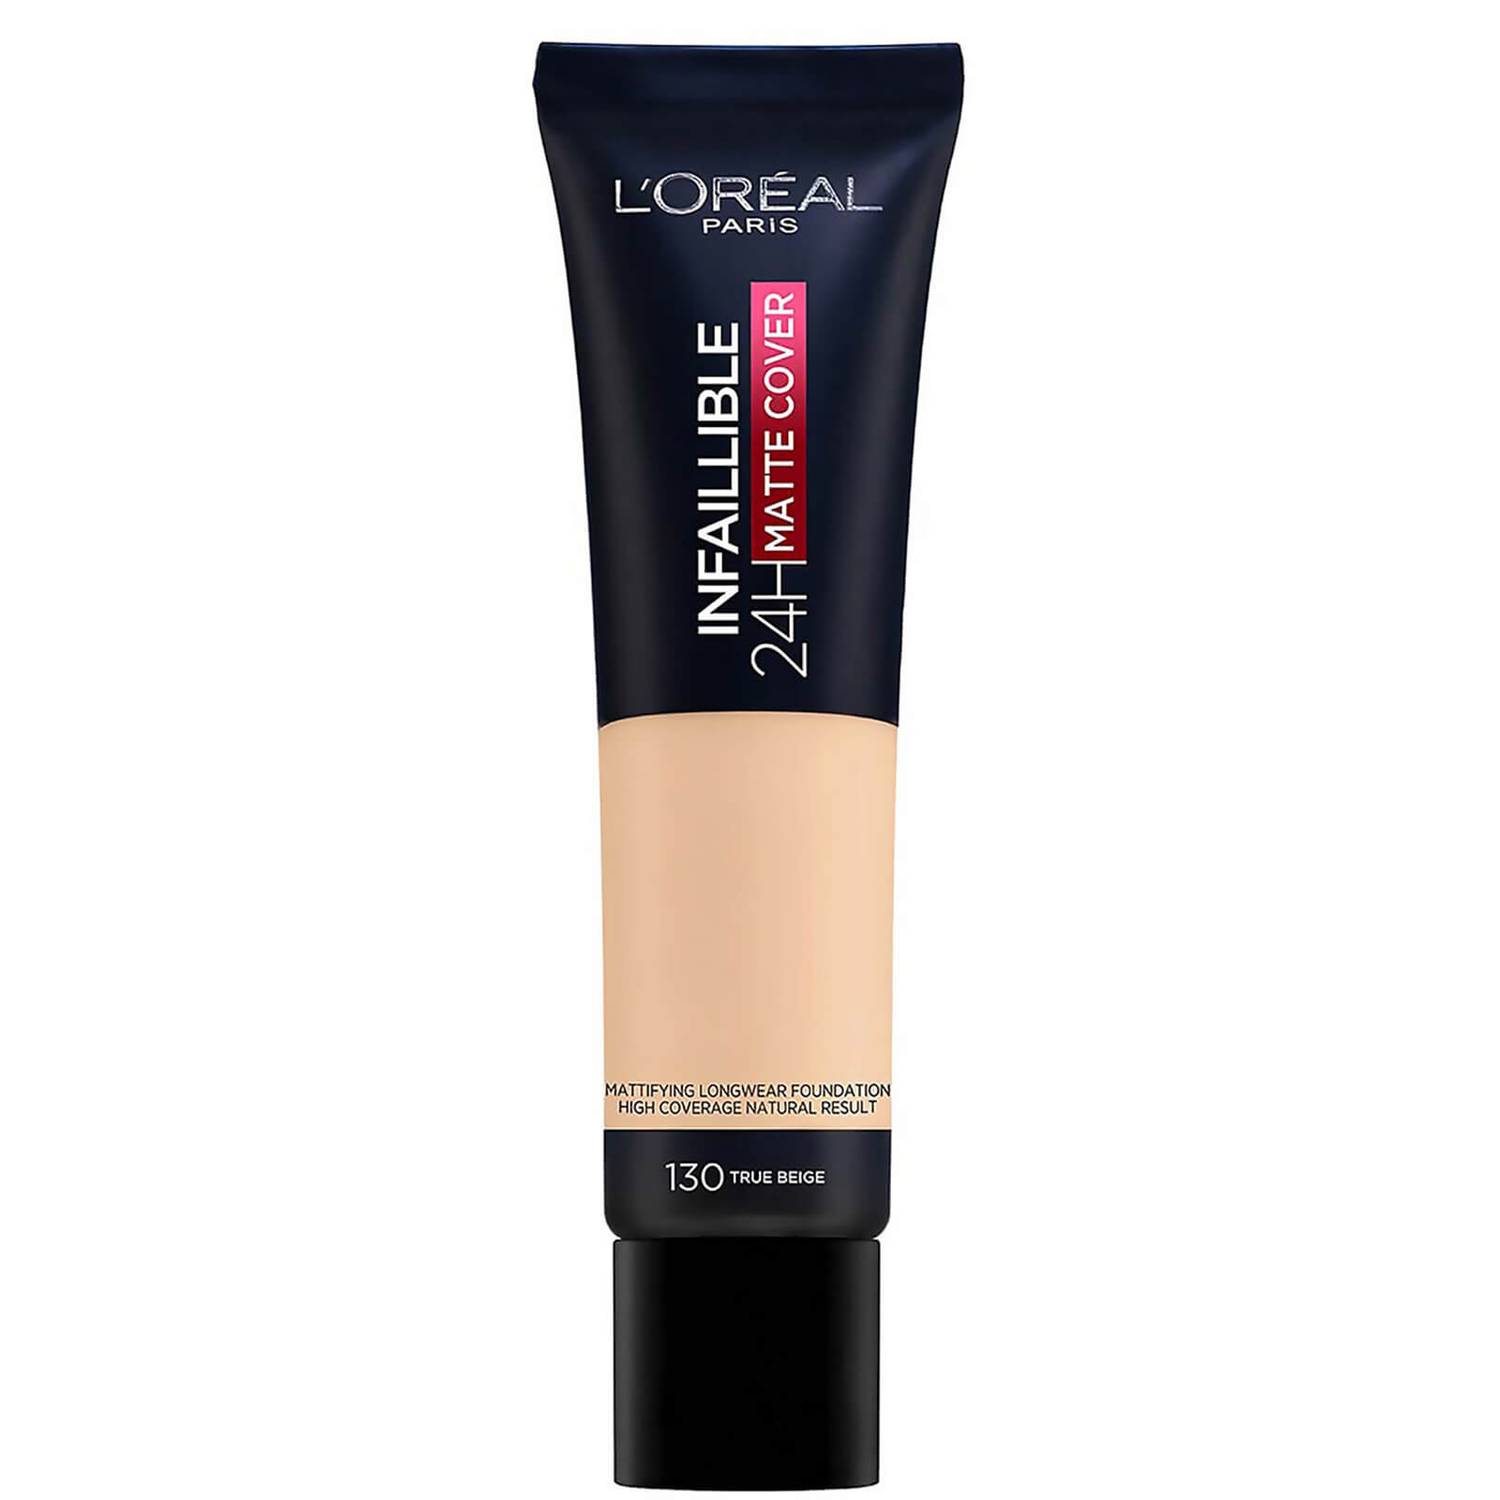 L’Oreal Paris, Infallible 24H Matte Cover Liquid Foundation (Source: www.lookfantastic.co.in)